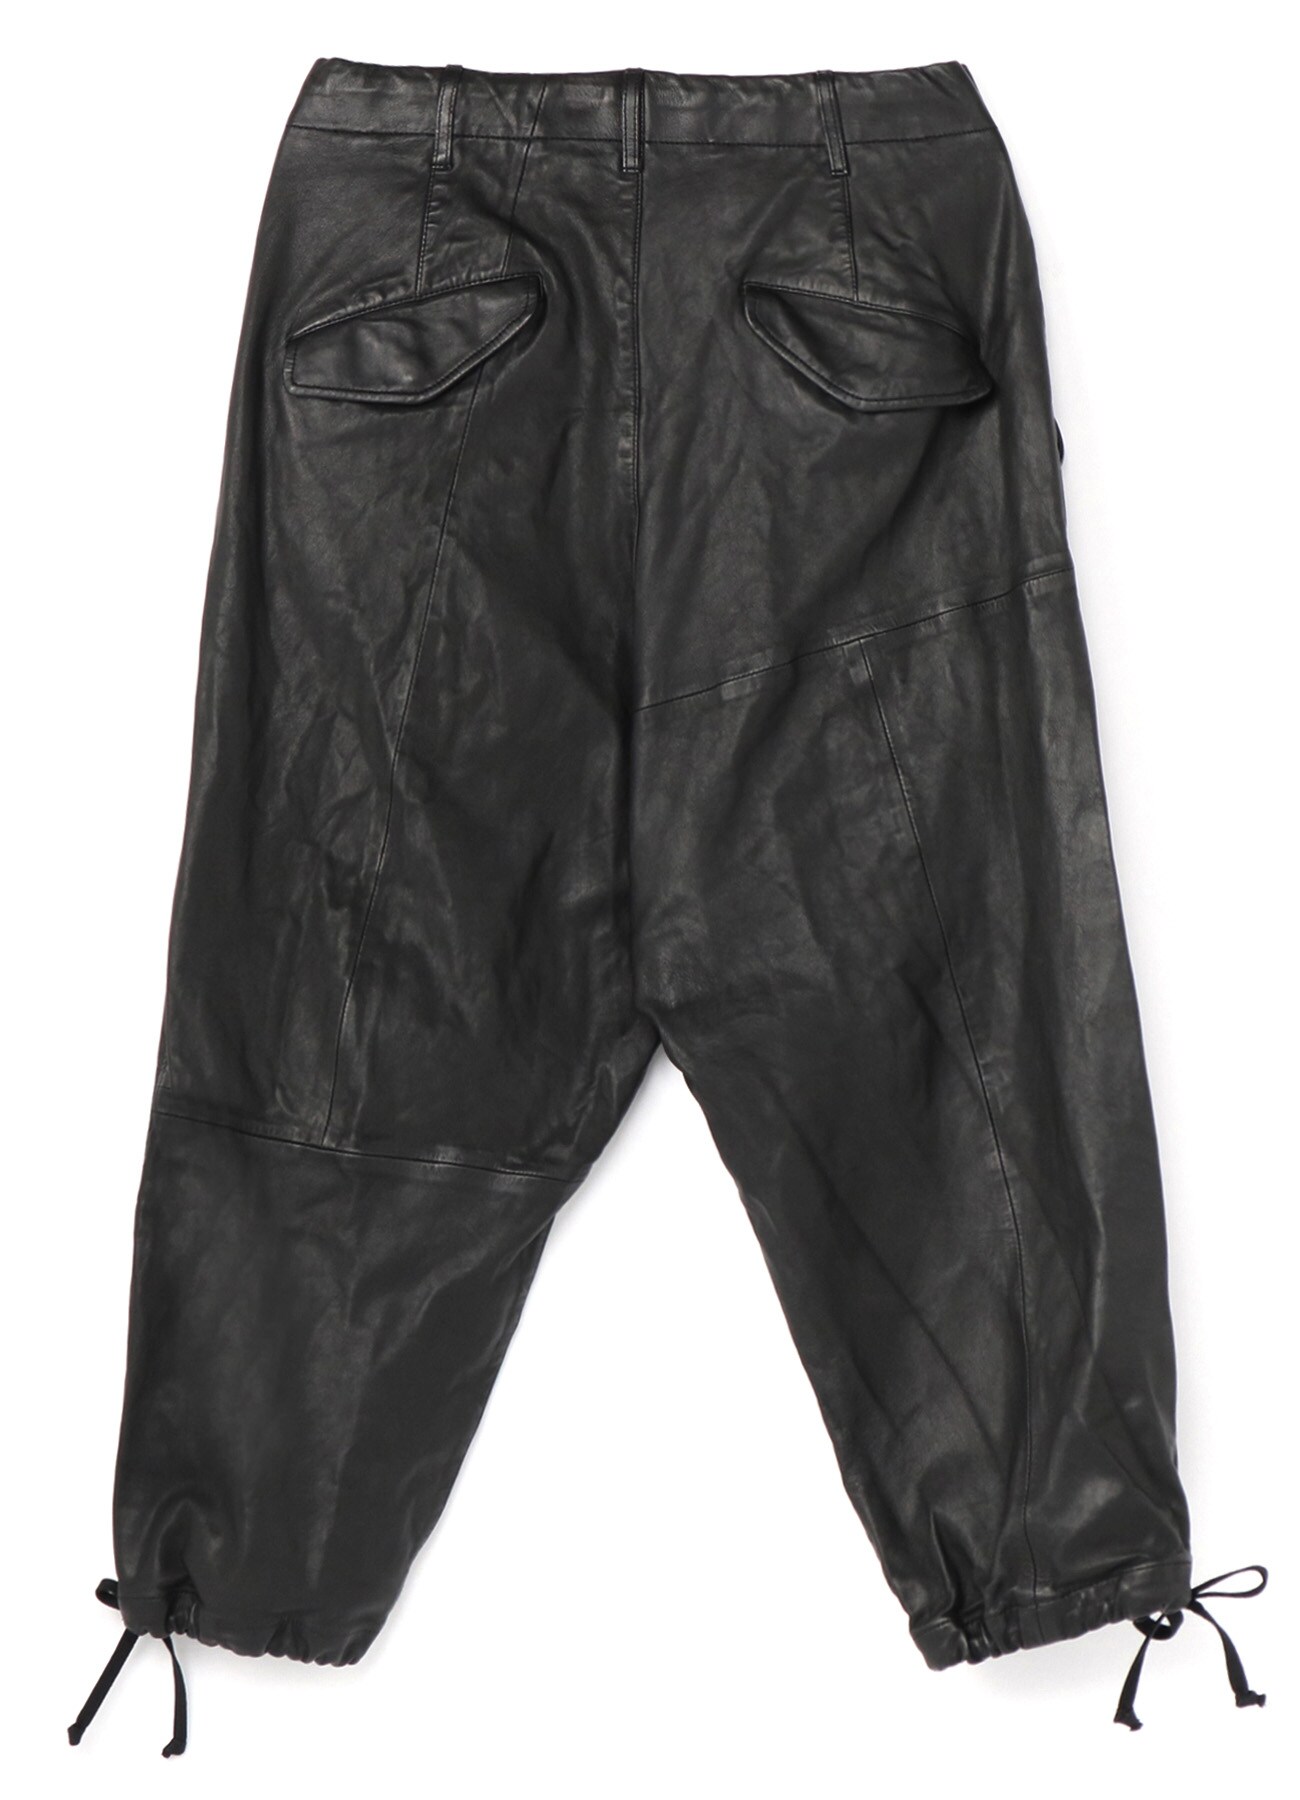 Sheepskin Leather Washed One Tuck Draw String Pants